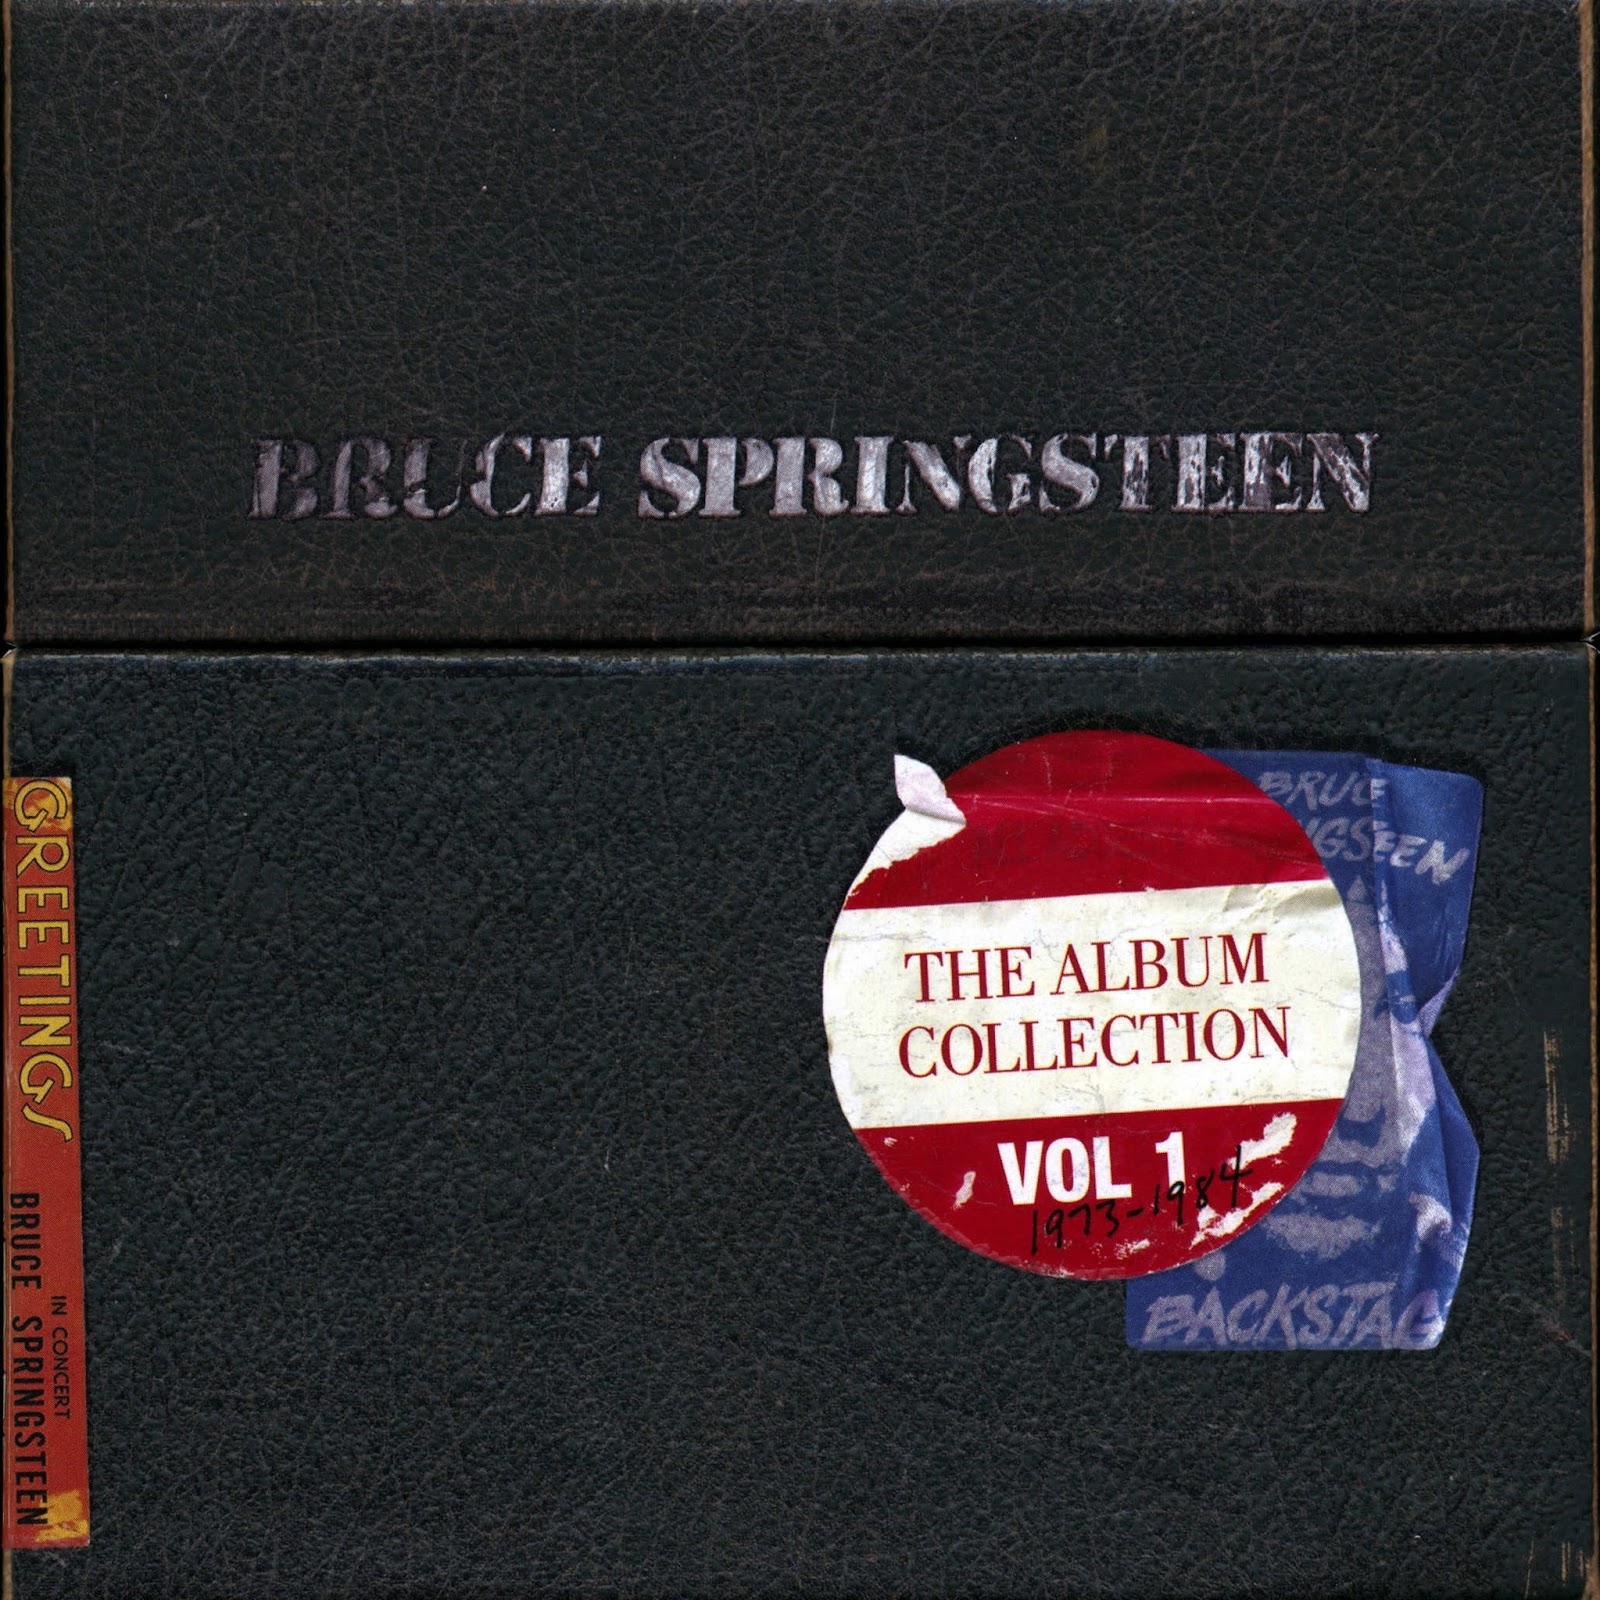 2014 The Album Collection Vol. 1 1973-1984 - Bruce Springsteen